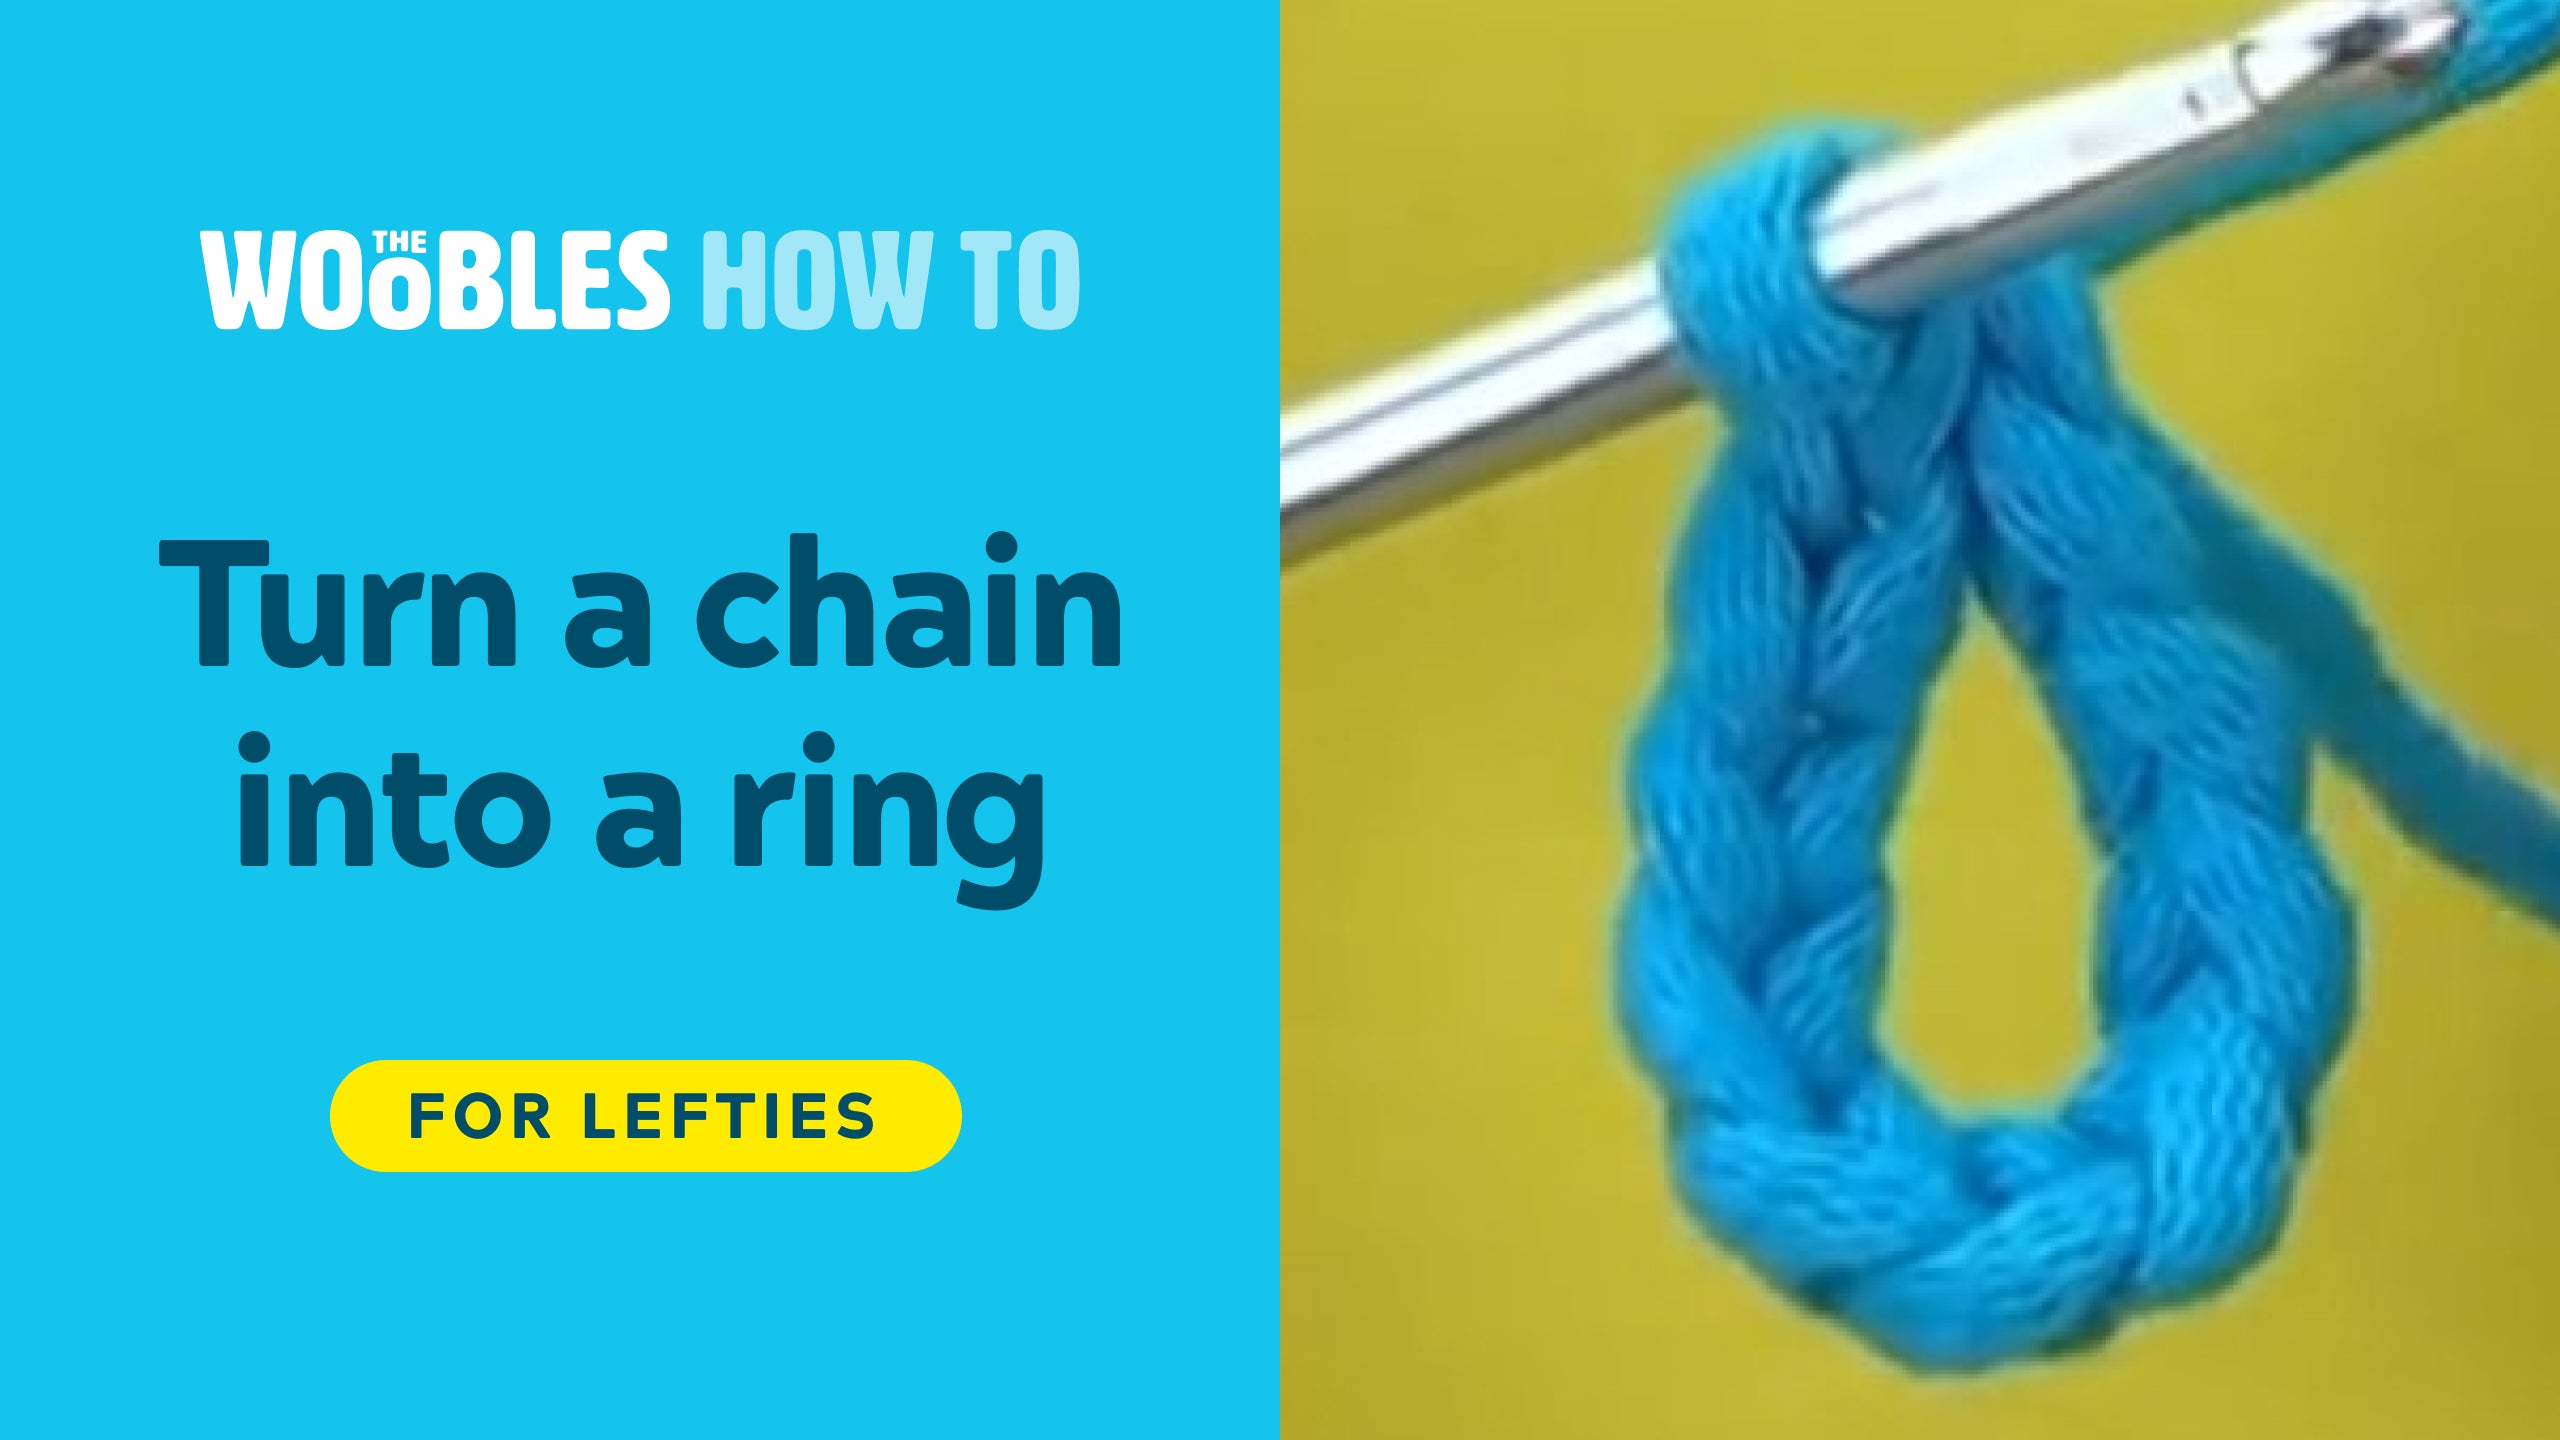 Turn a chain into a ring